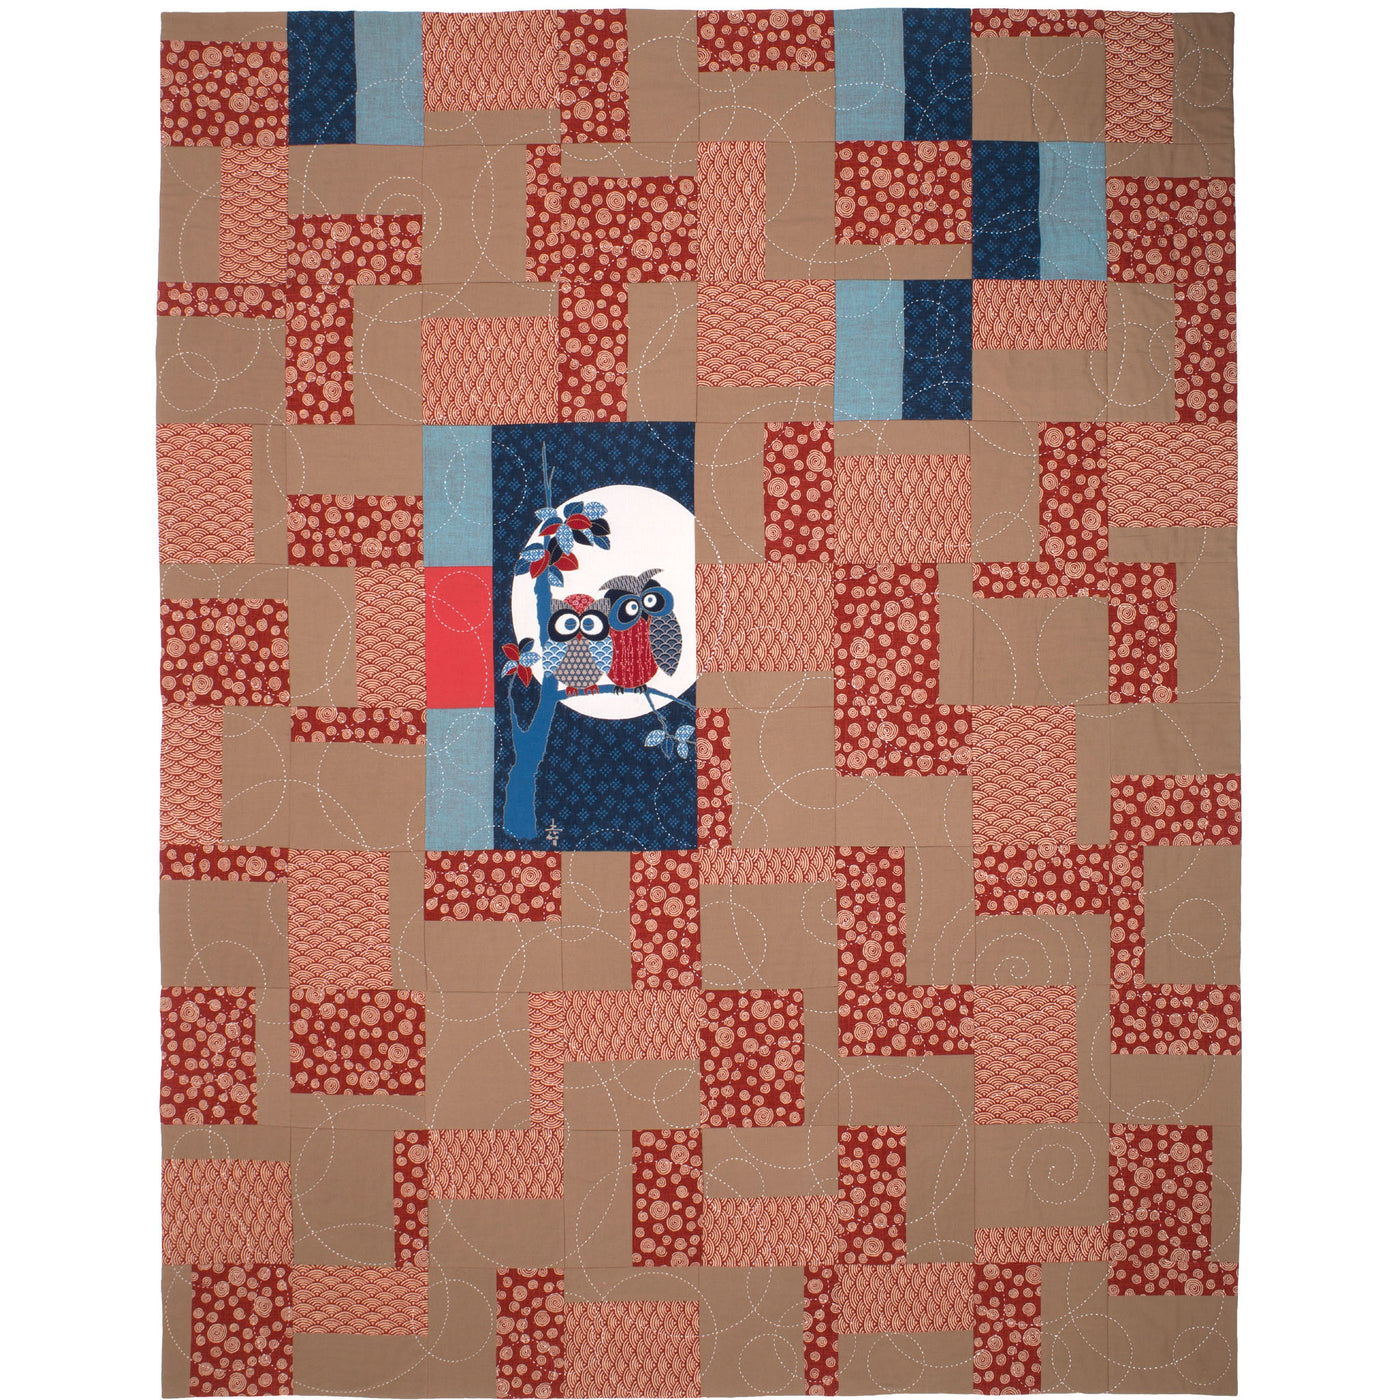 Lucky Owls, a quilt by Patricia Belyea